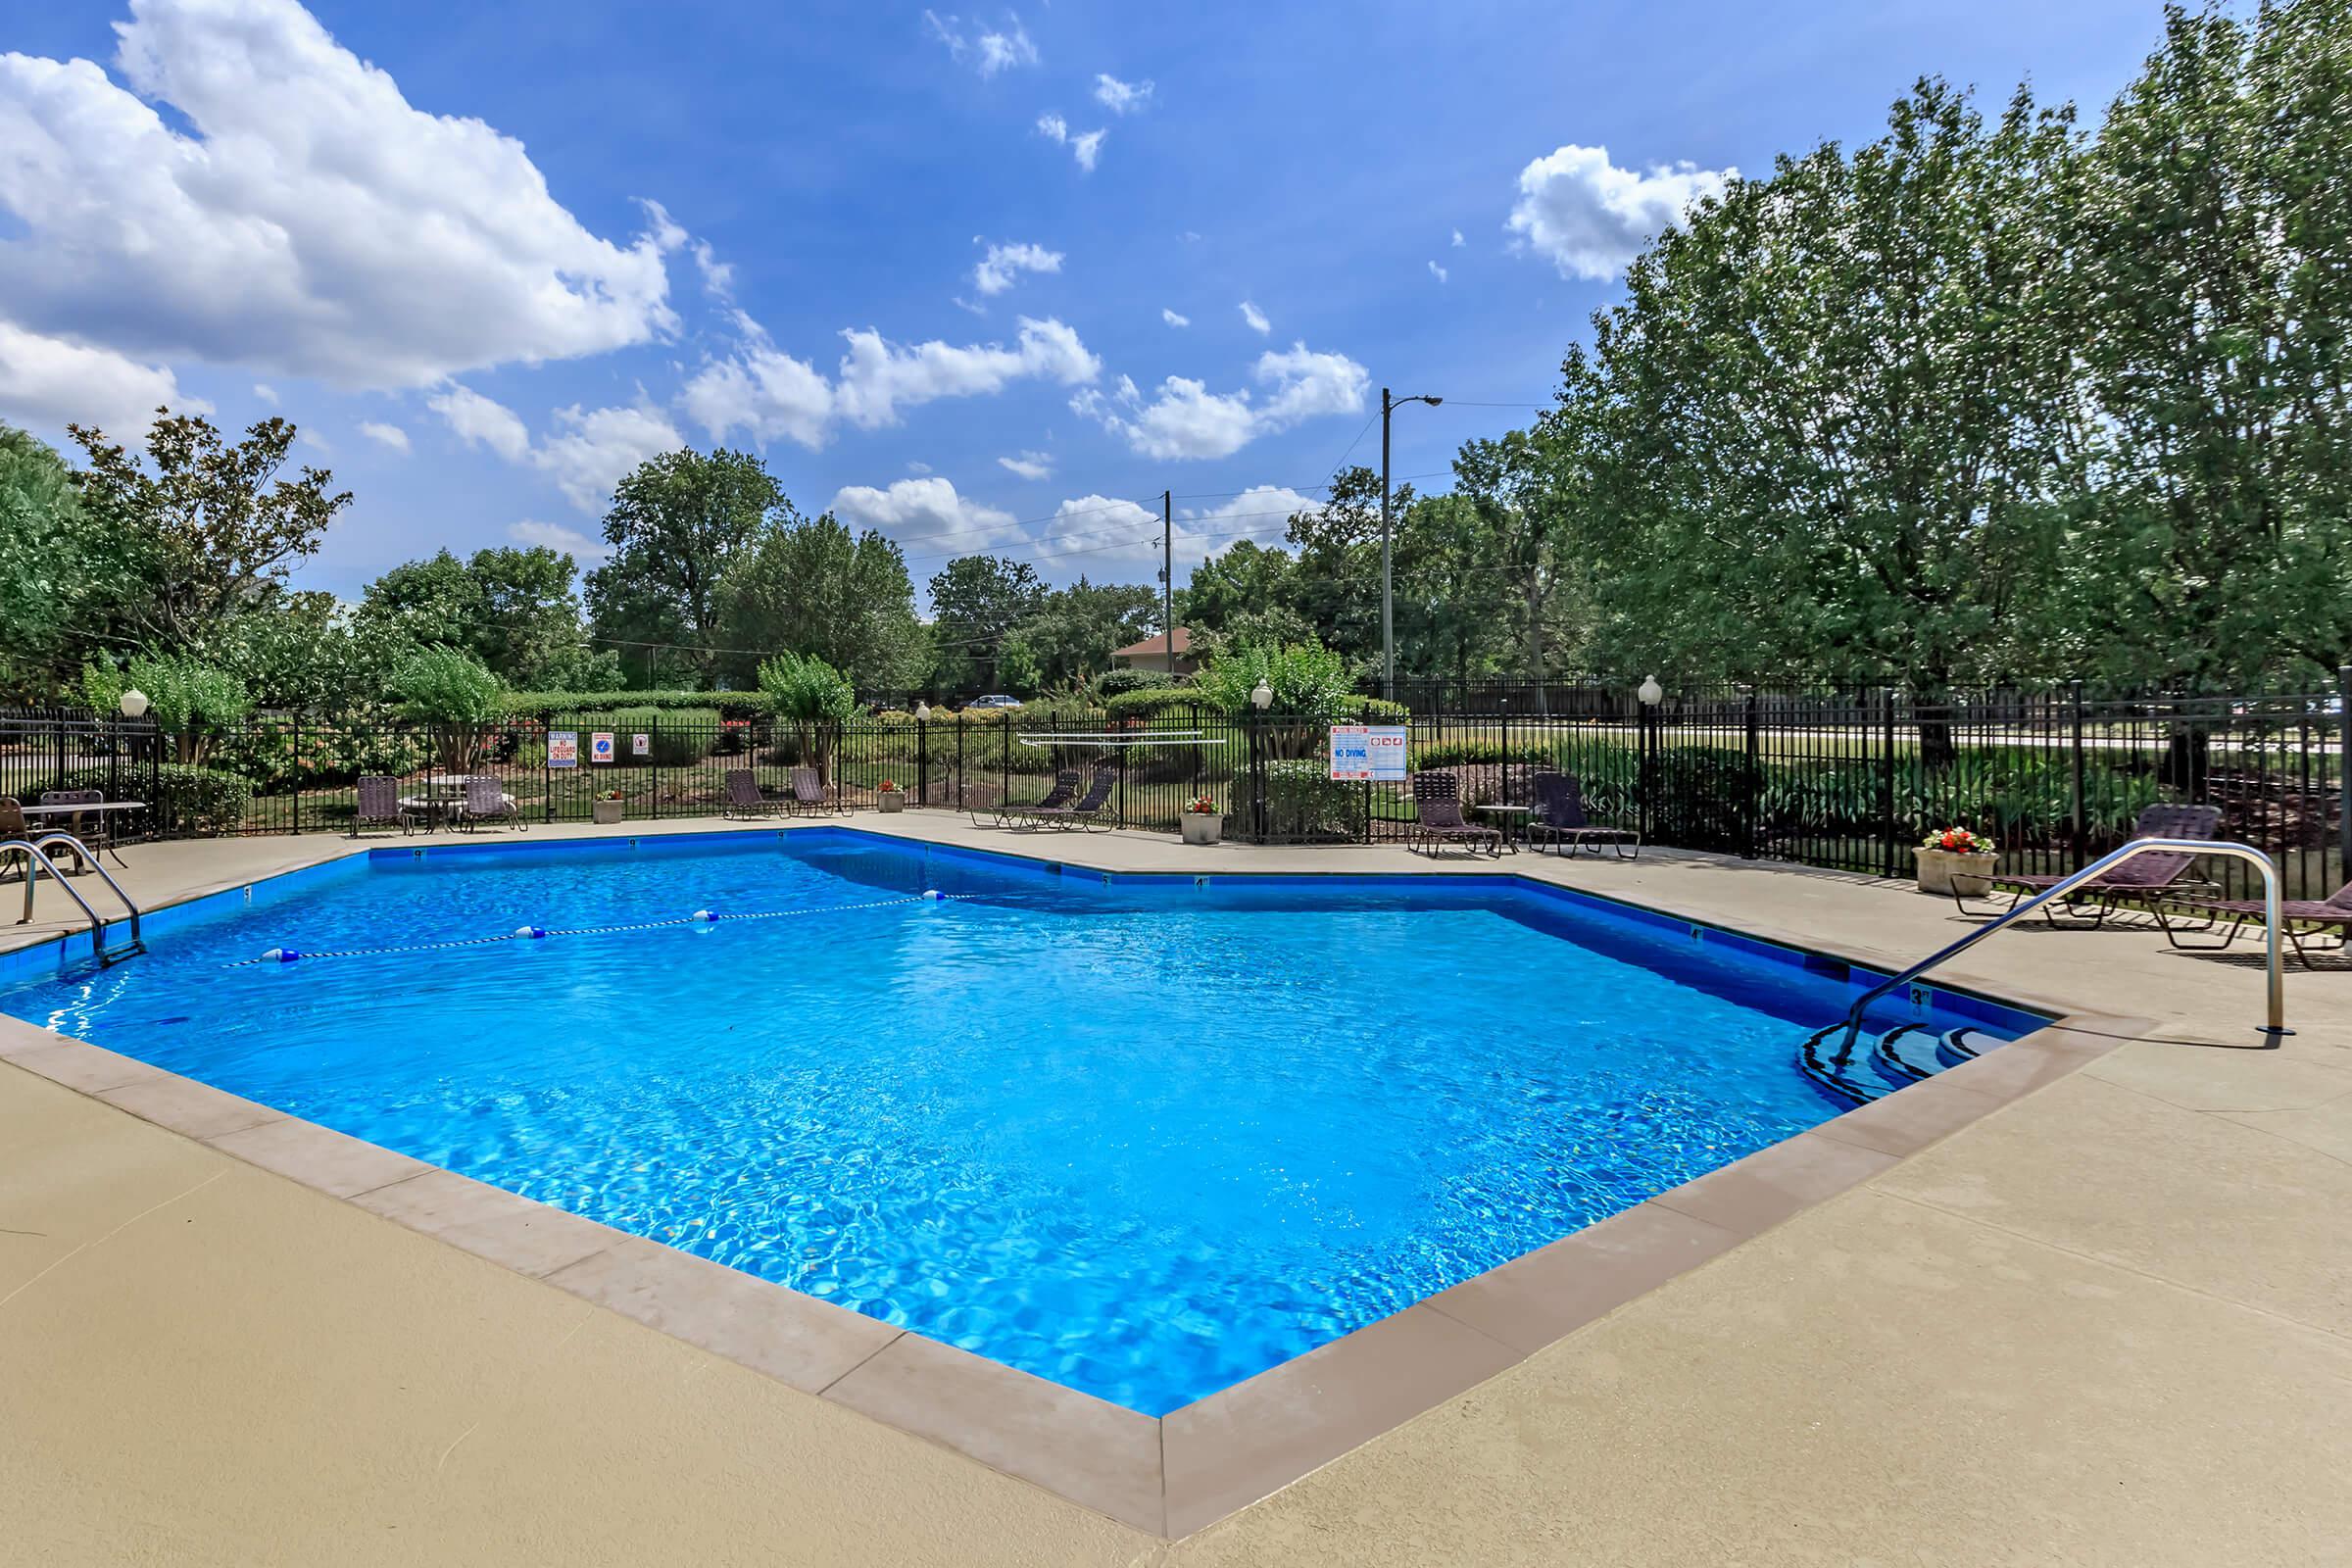 Make Some Waves at Chase Cove Apartments